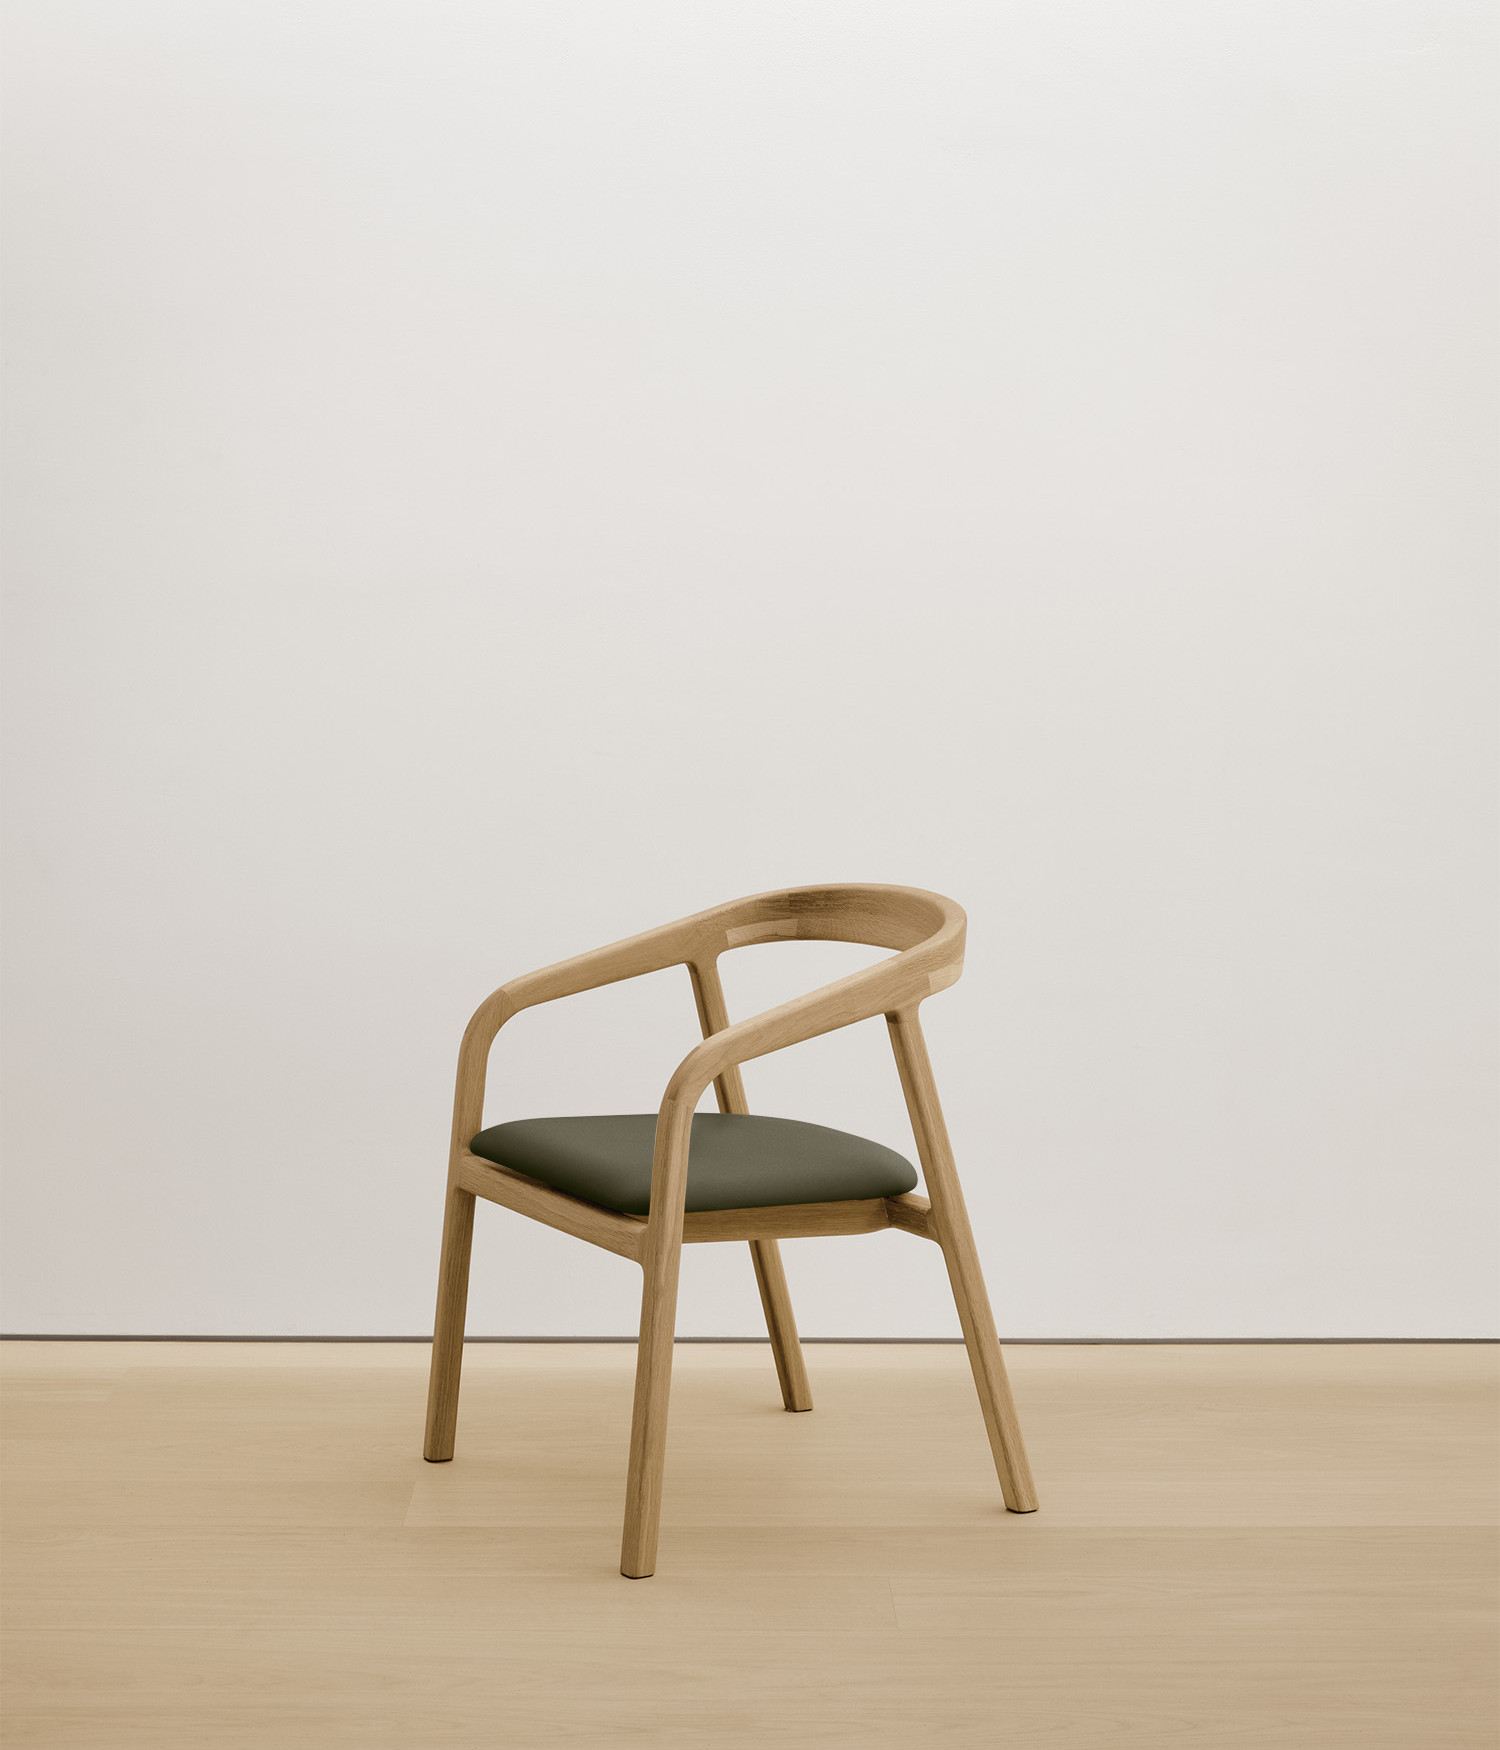  white-oak chair with forest color upholstered seat